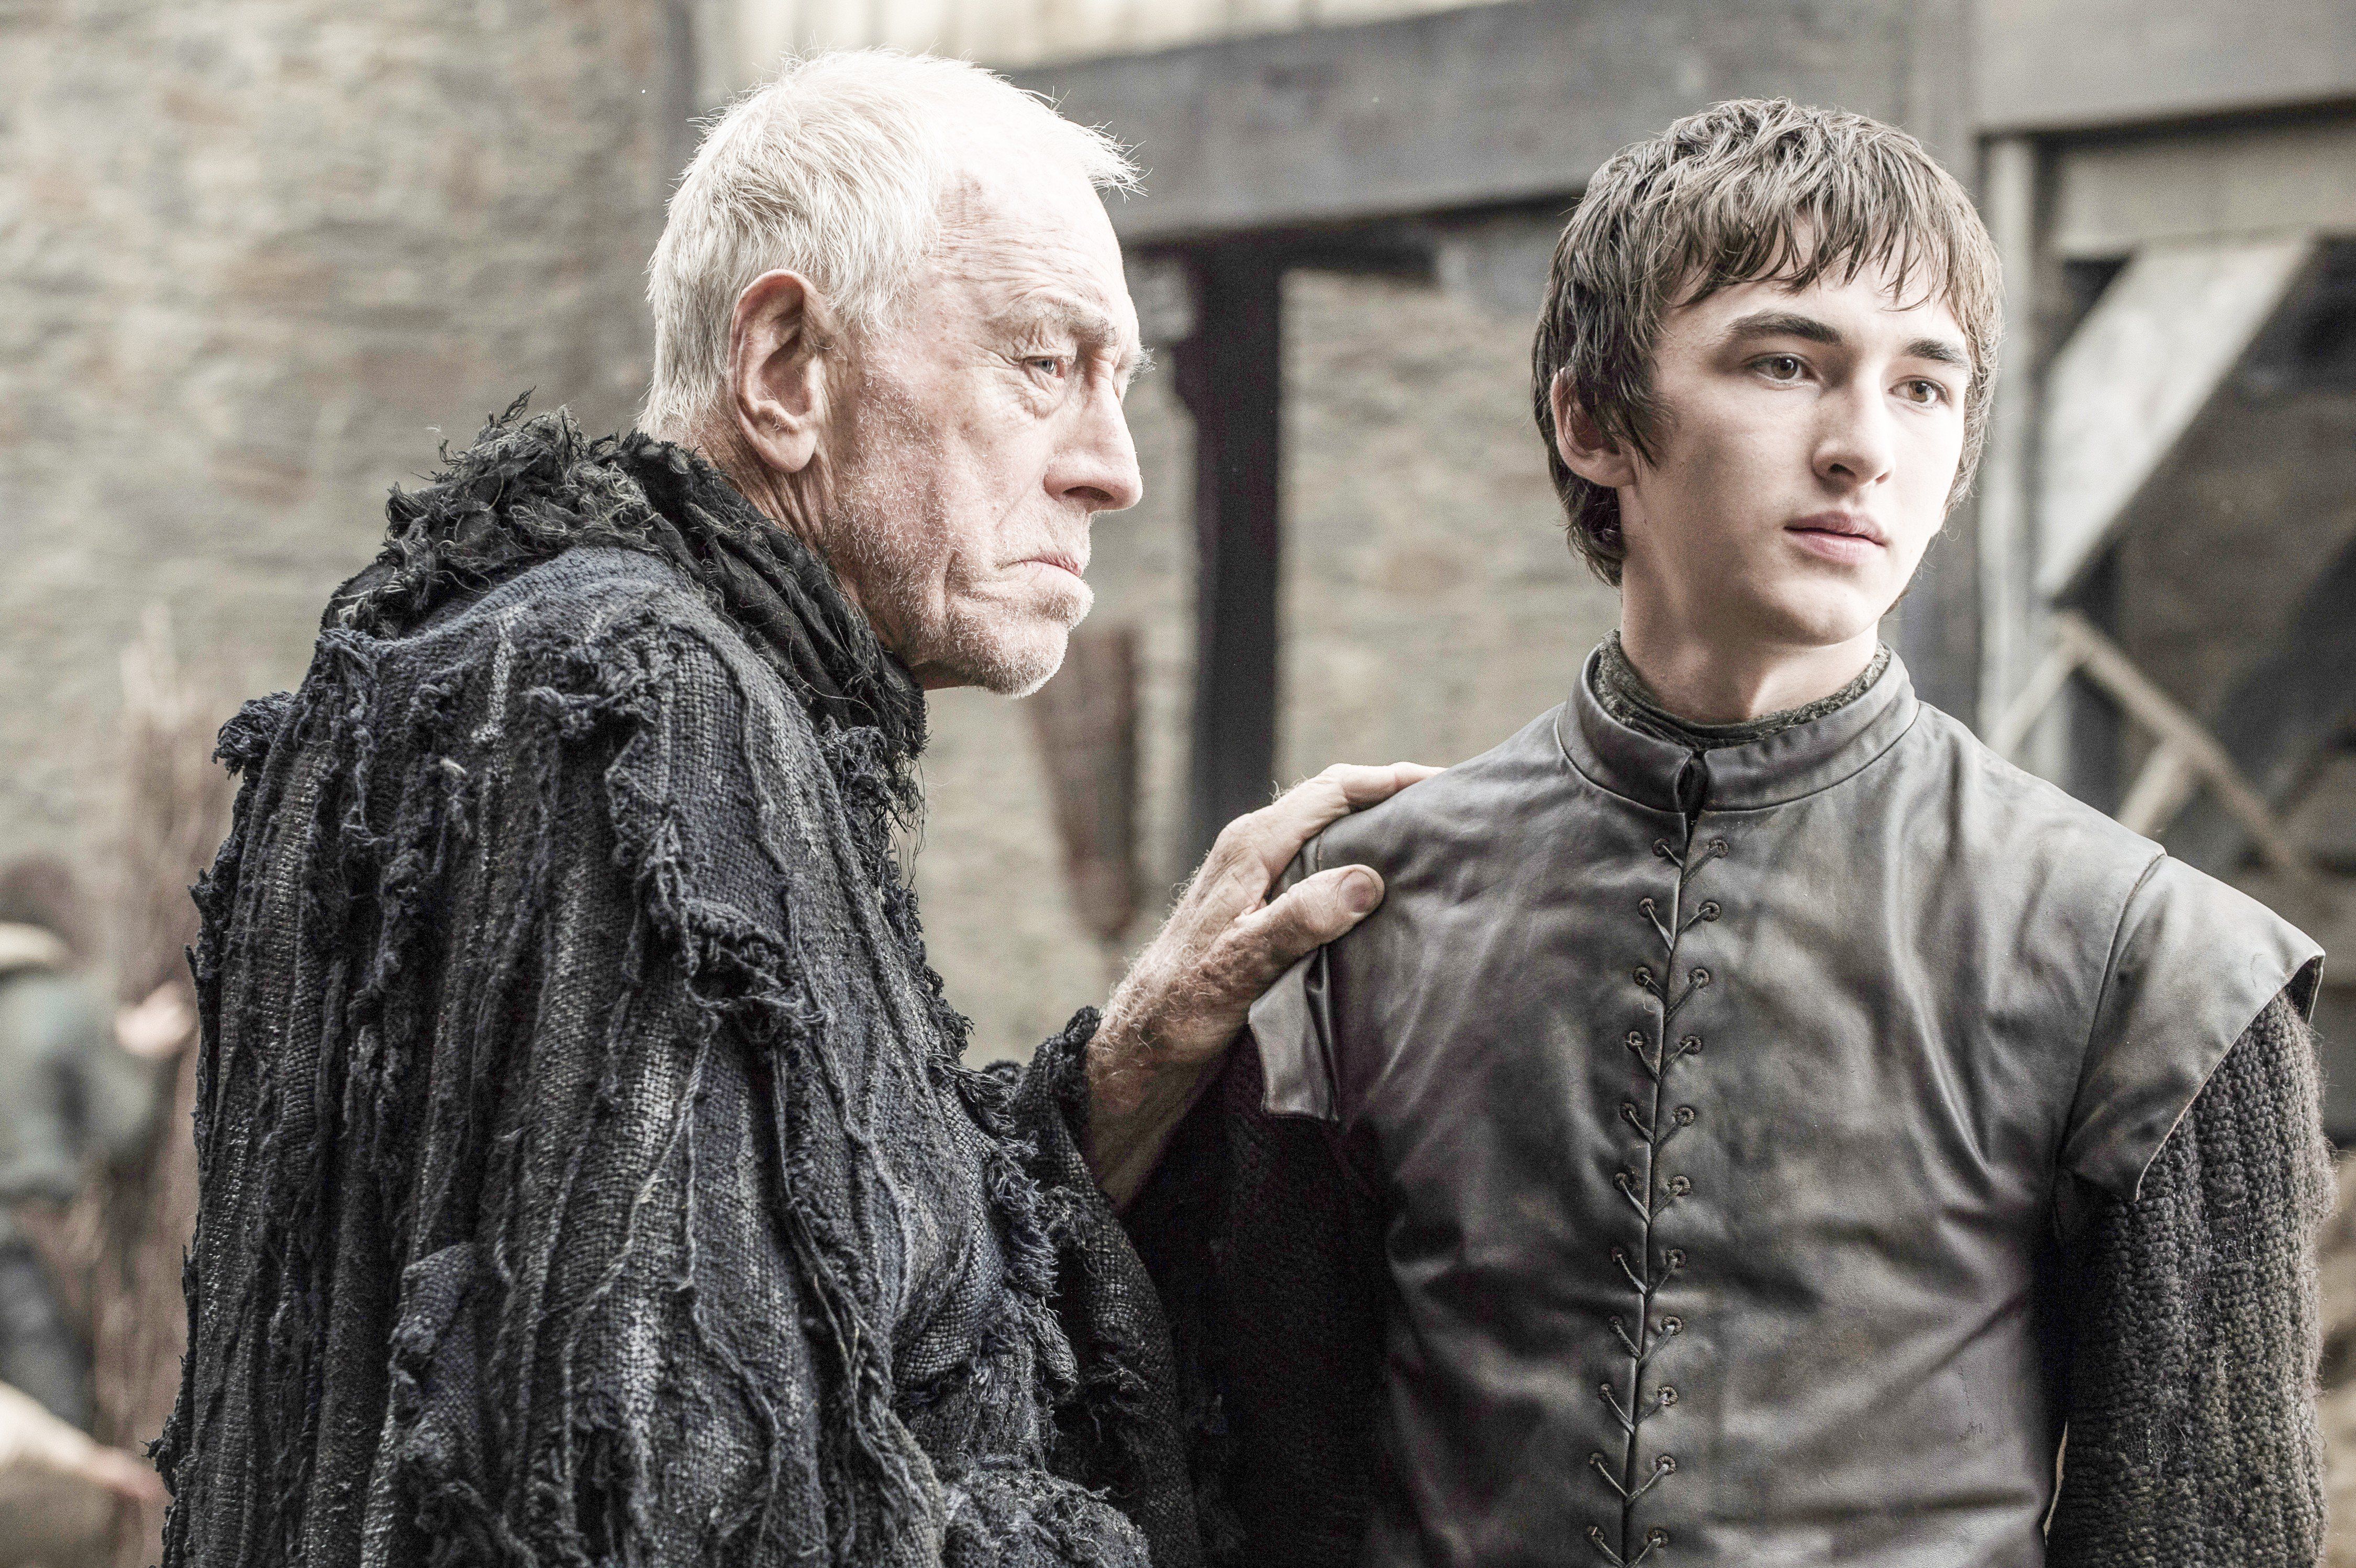 Request Rick and Morty as Bran and the three eyed raven